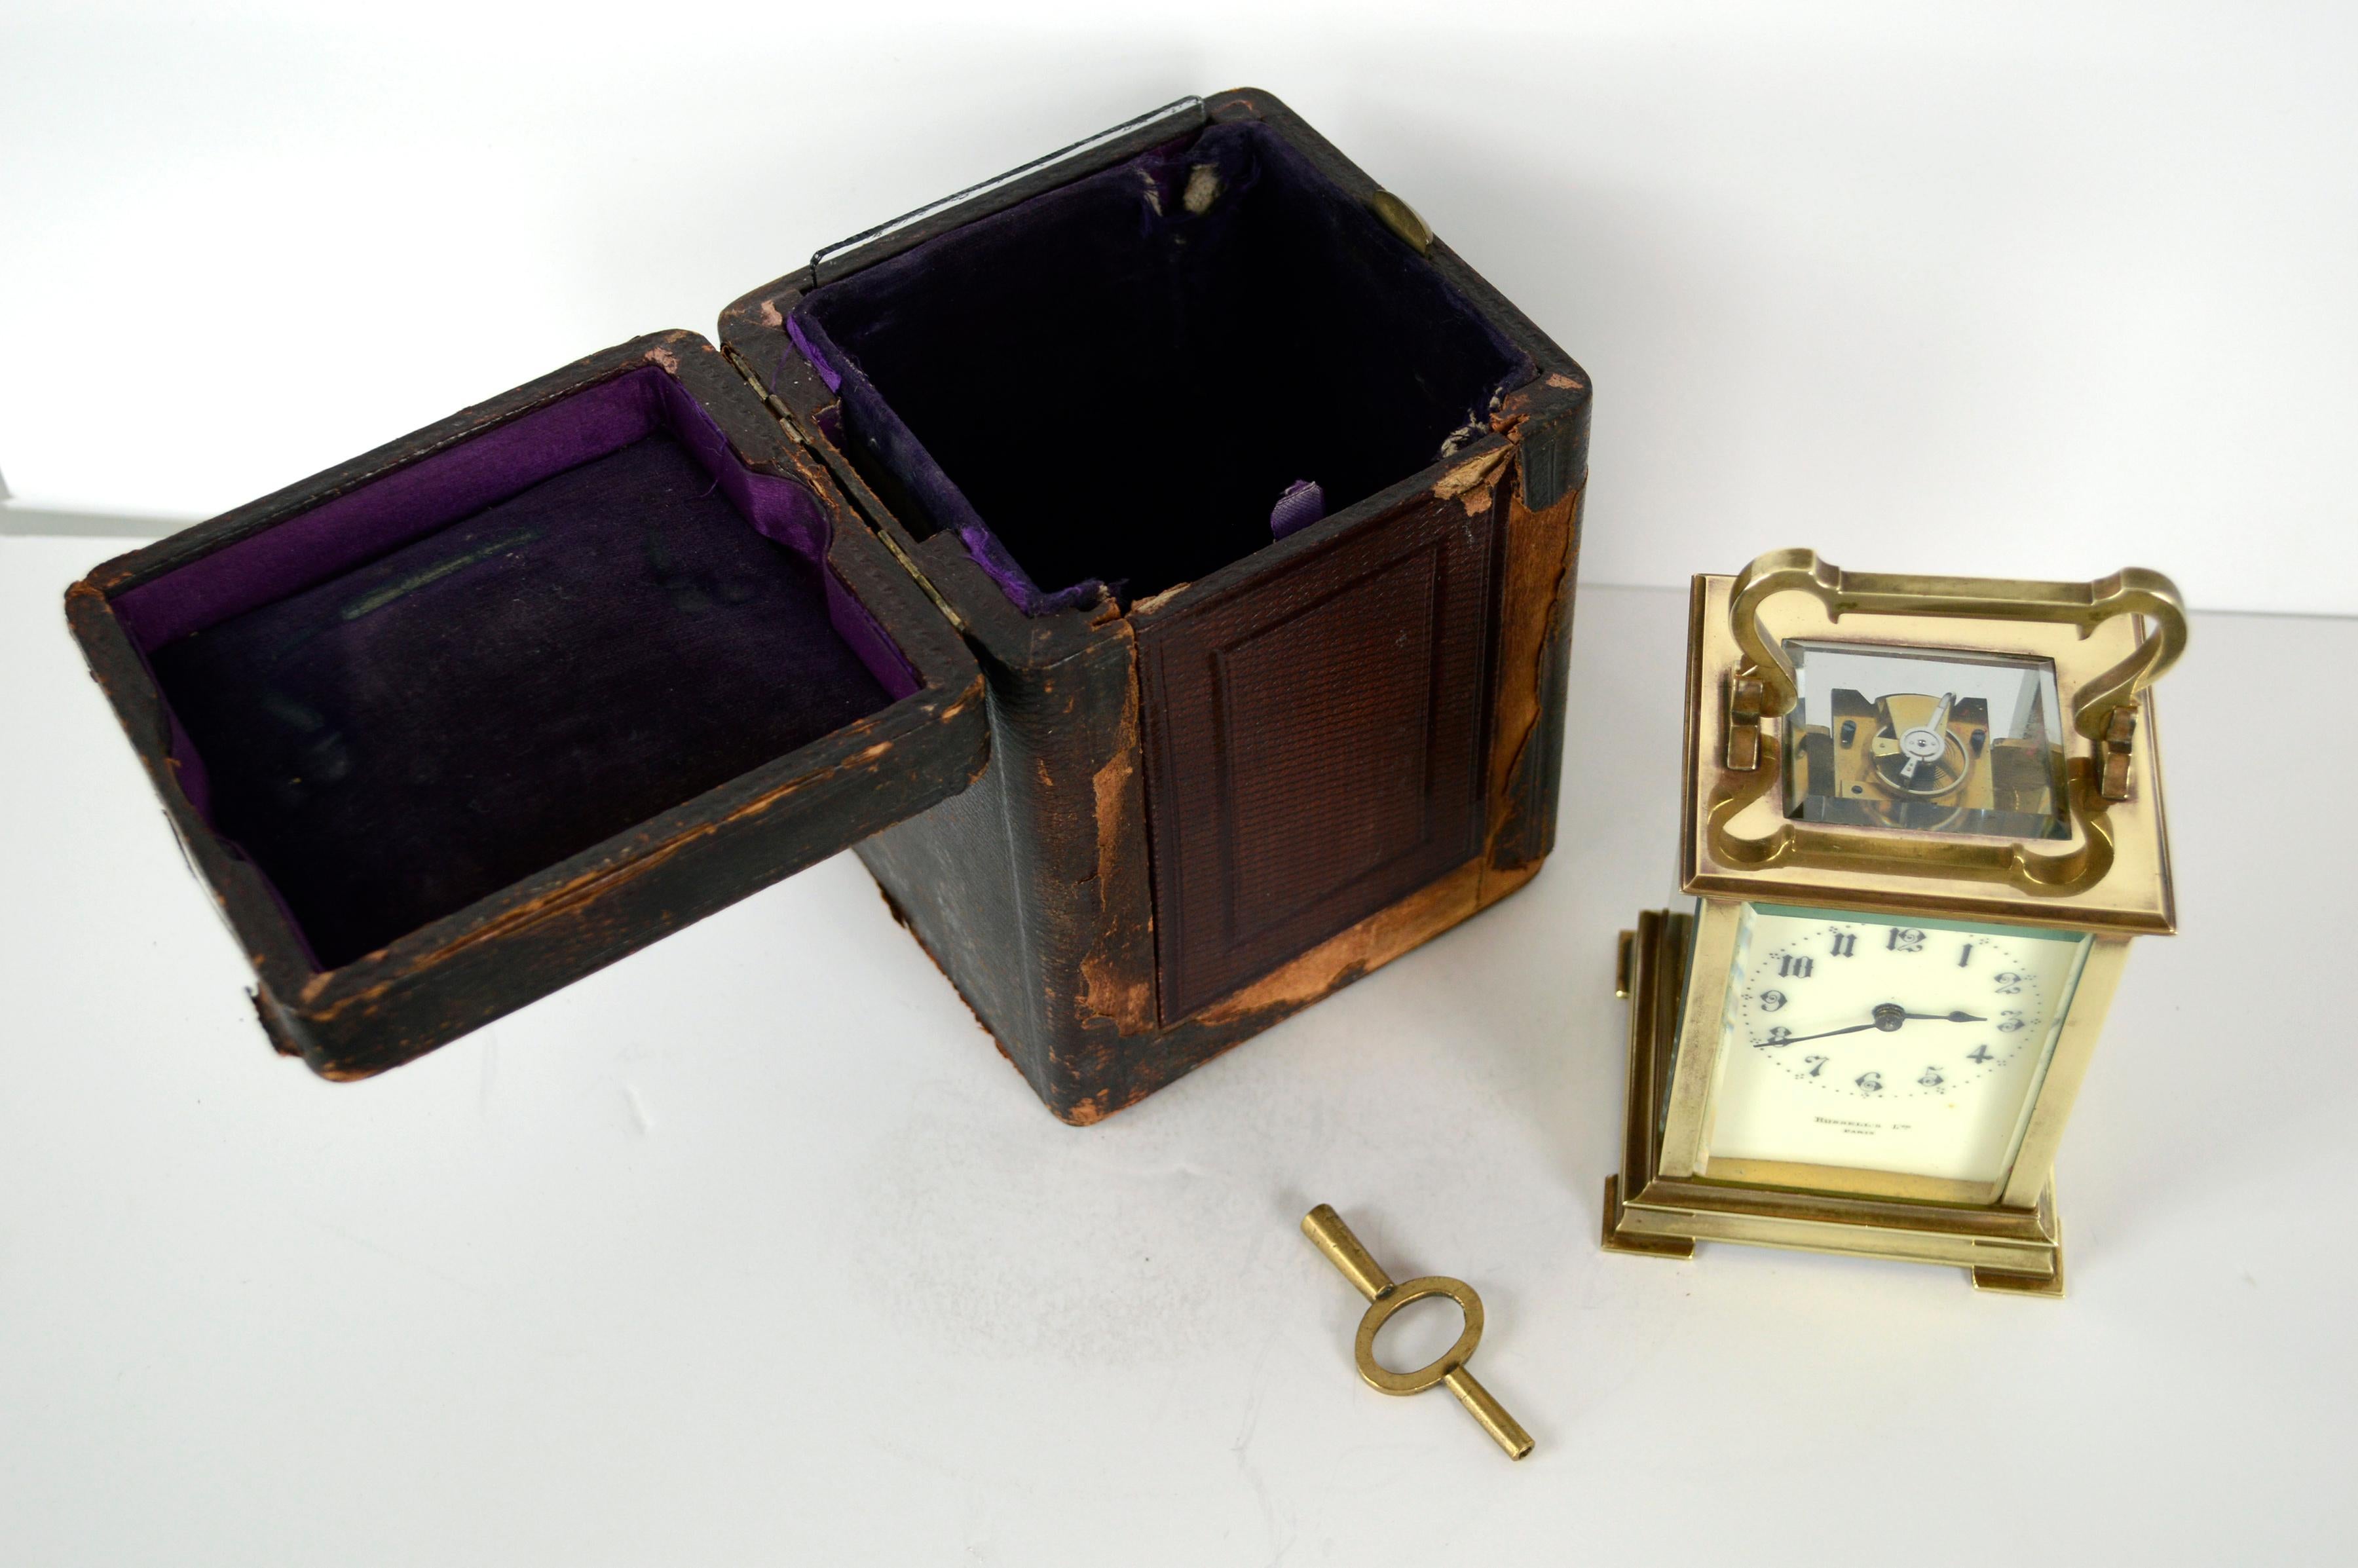 A wonderful late 19th-century brass carriage clock with it's carrying case and winding key sold by Russell's Ltd. (England/France, founded 1848), c.1890s. Signed on the dial 